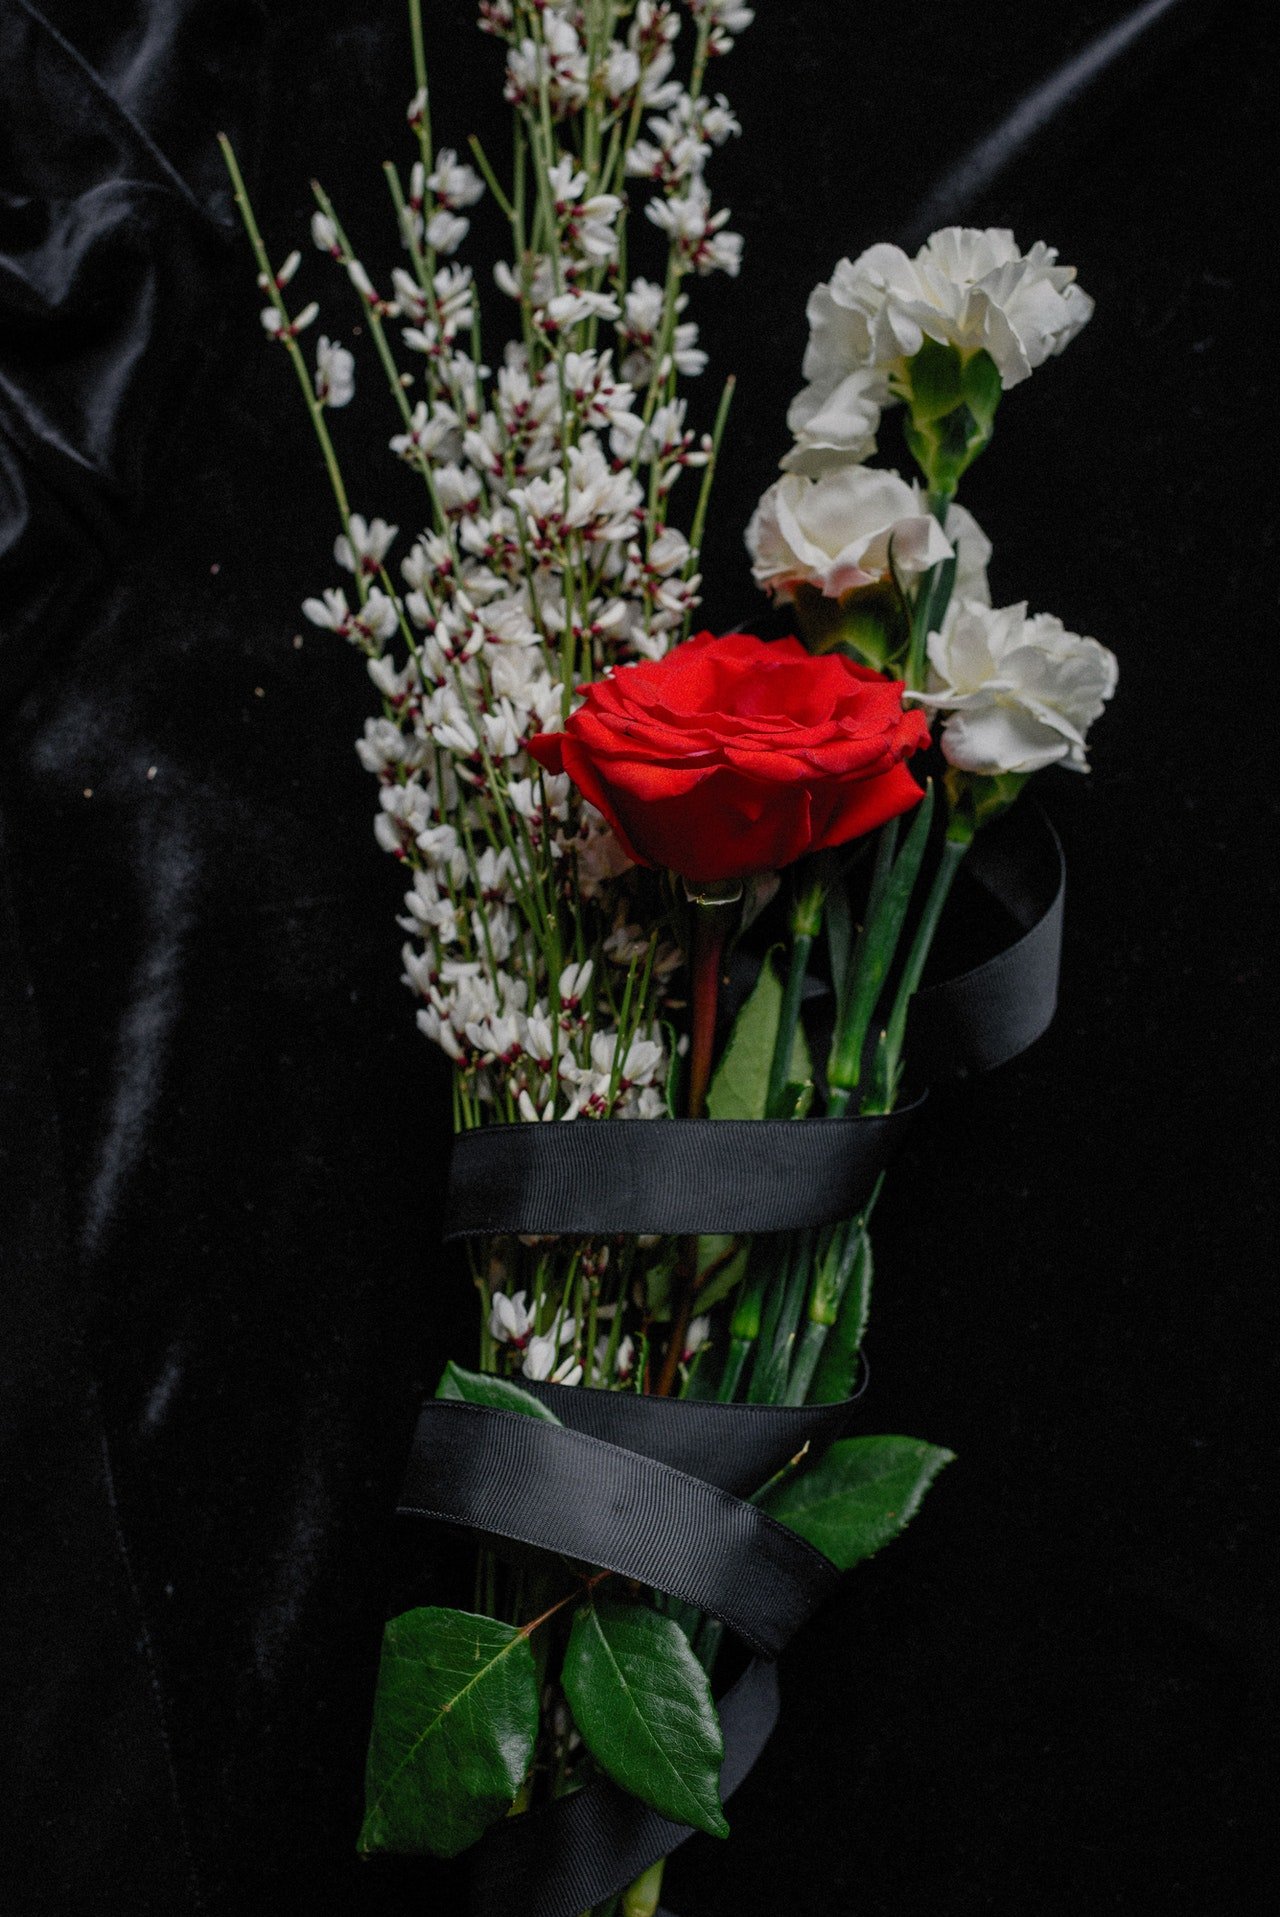 Bouquet wrapped in black paper | Source: Pexels